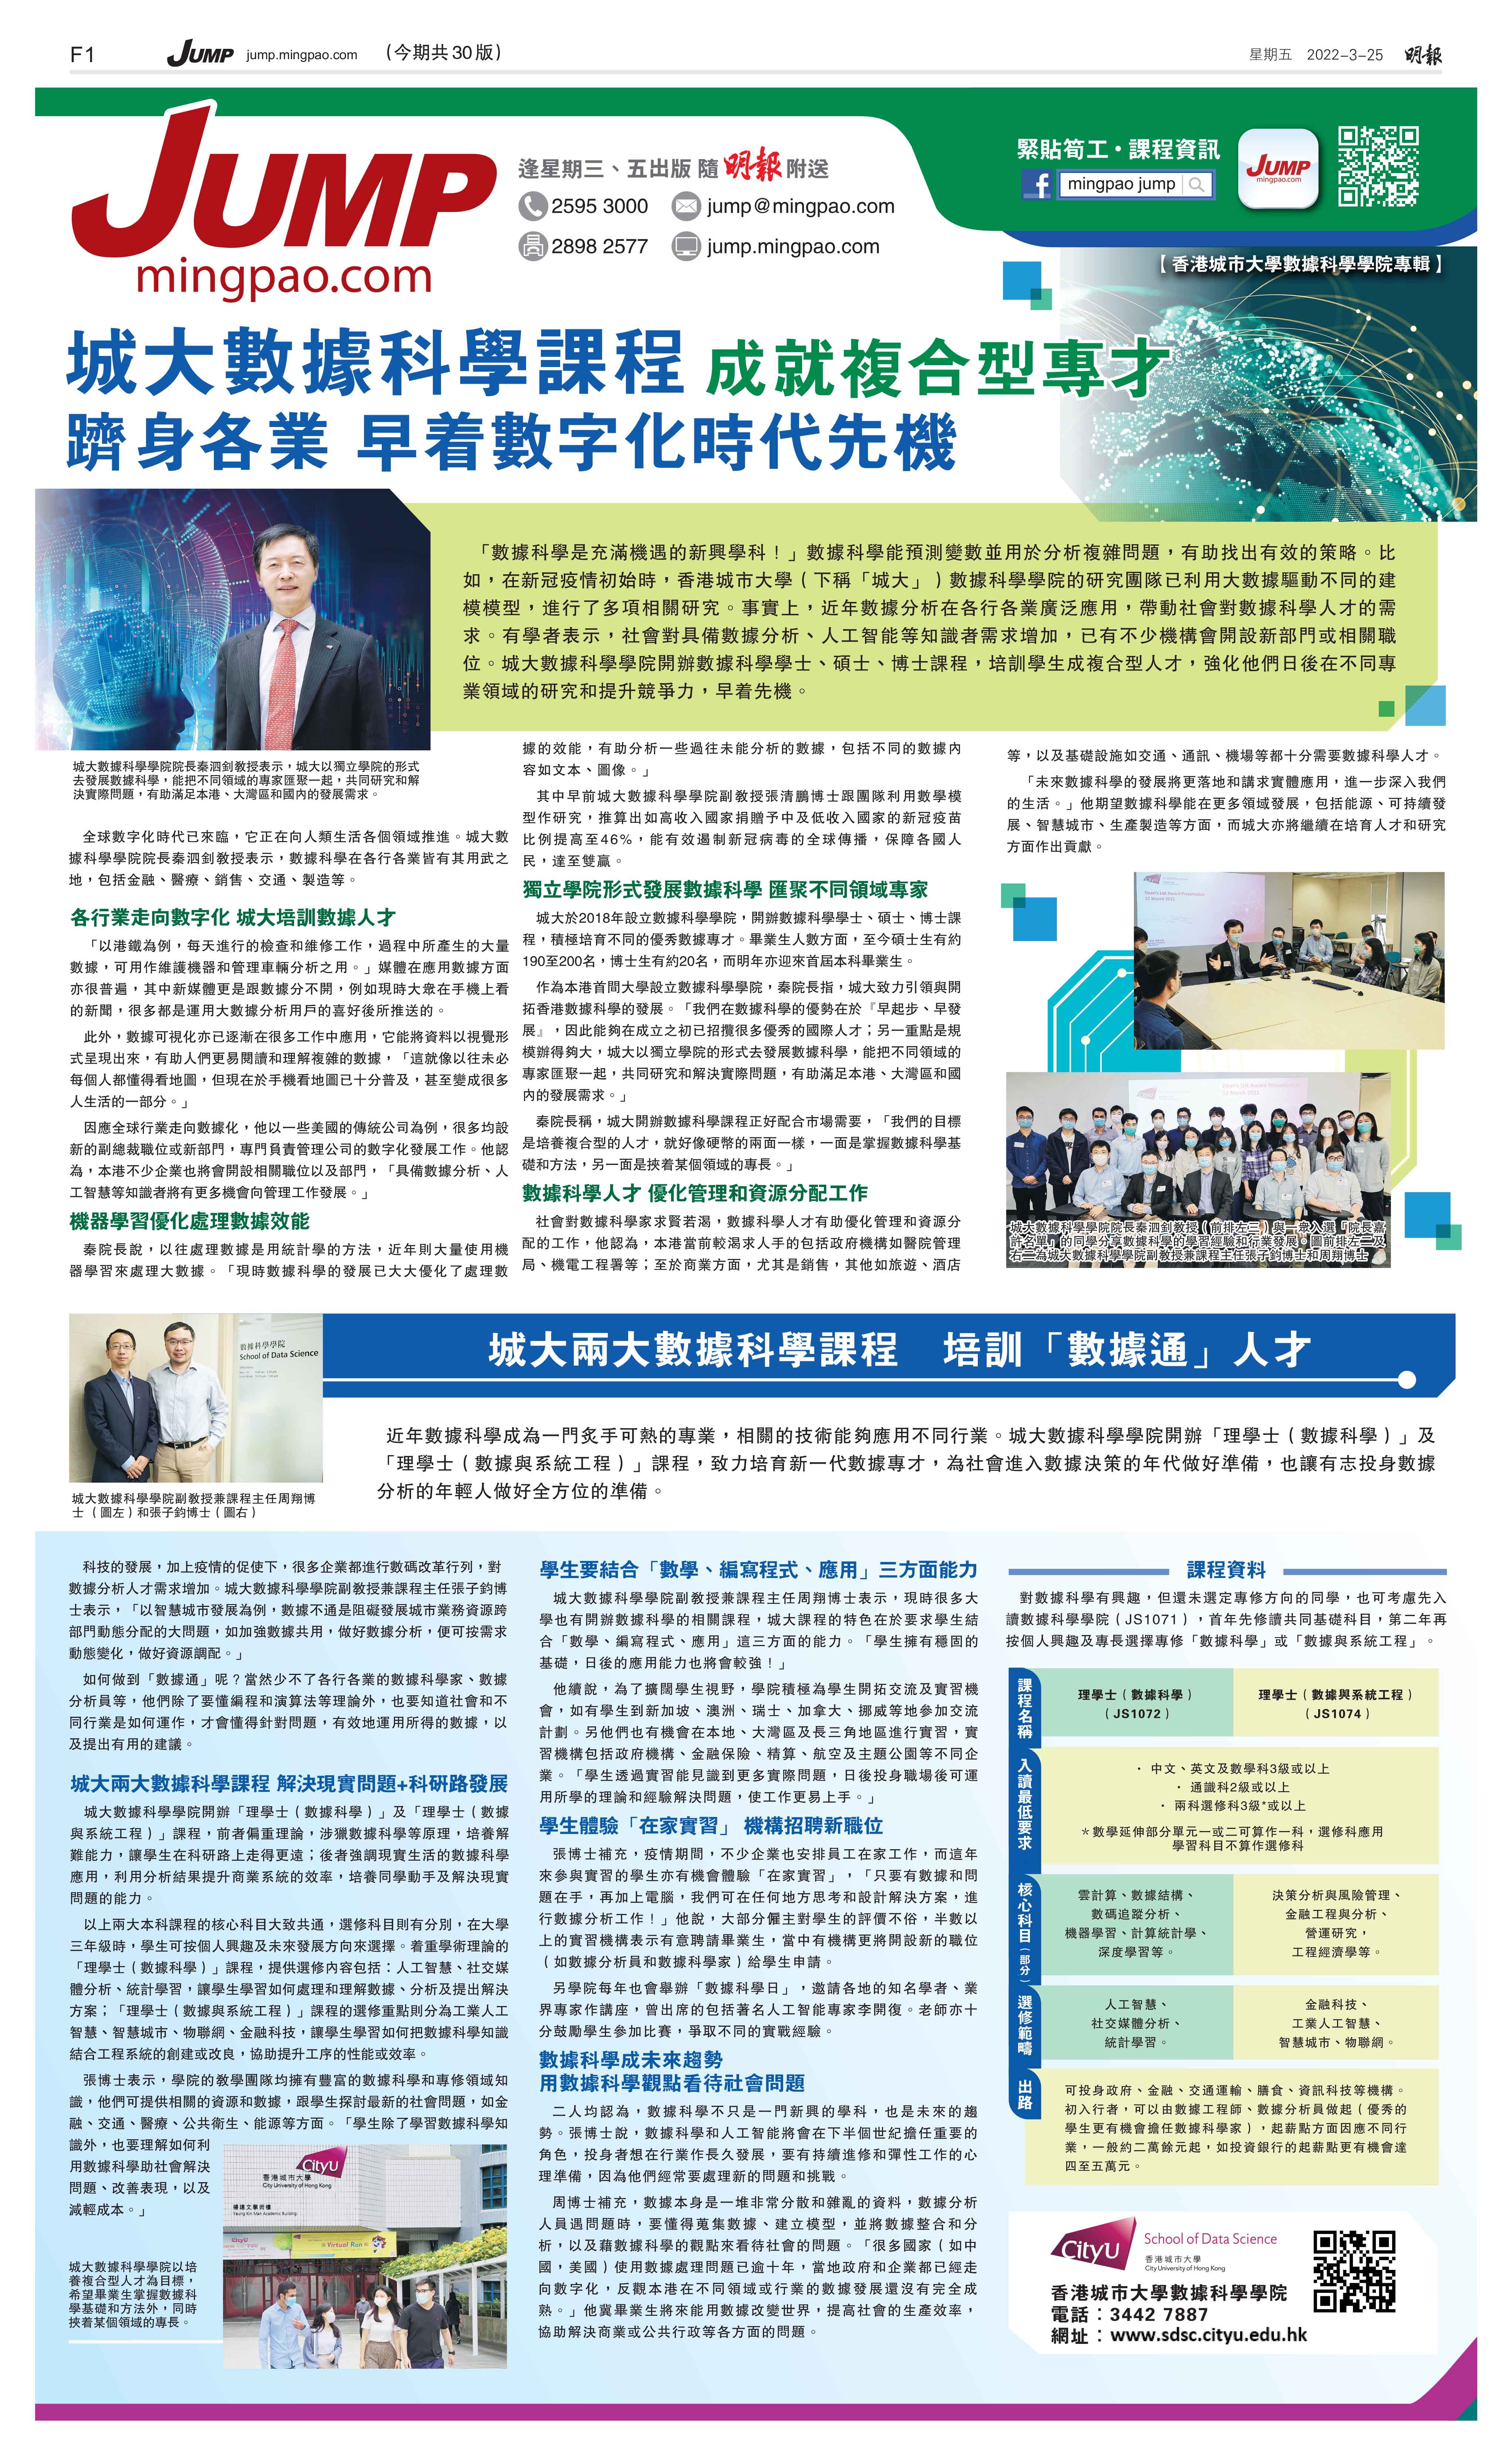 25March2022_Ming_Pao_JUMP_Front_Page_Advertorial